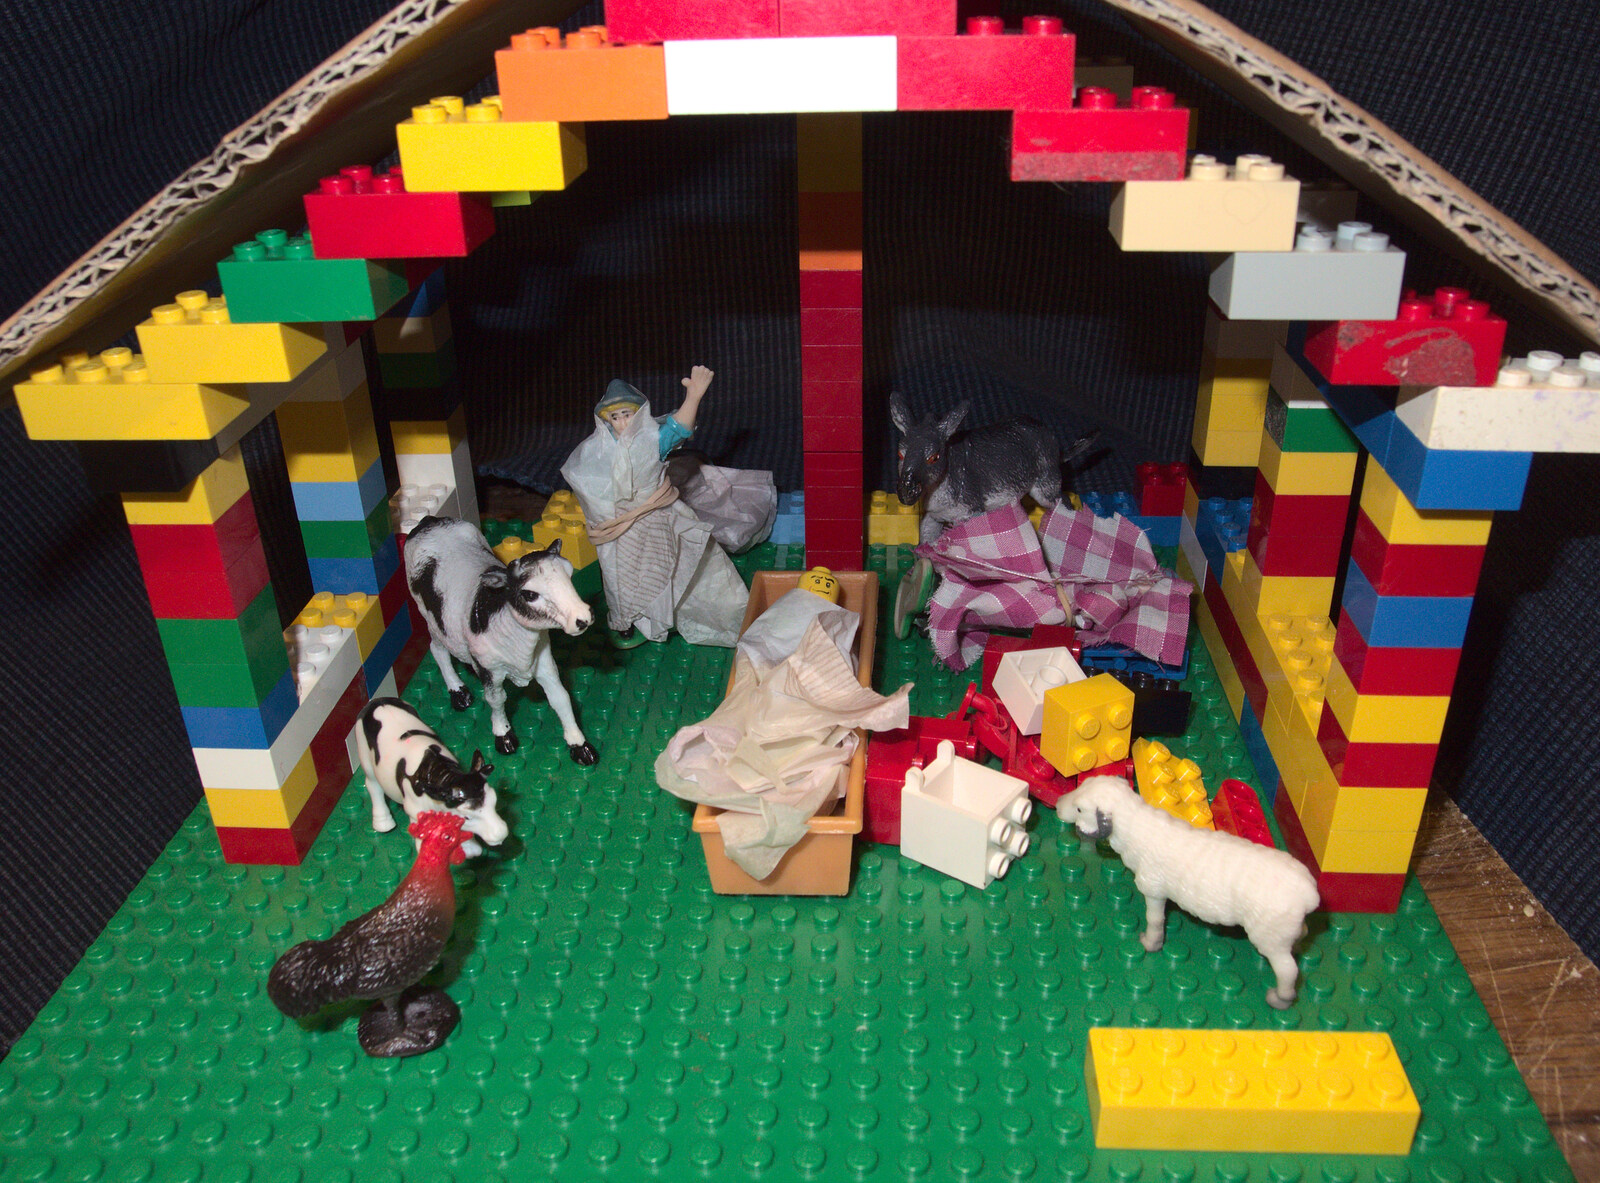 There's a Lego nativity scene somewhere from A Trip to Abbey Gardens, Bury St. Edmunds, Suffolk - 20th December 2014